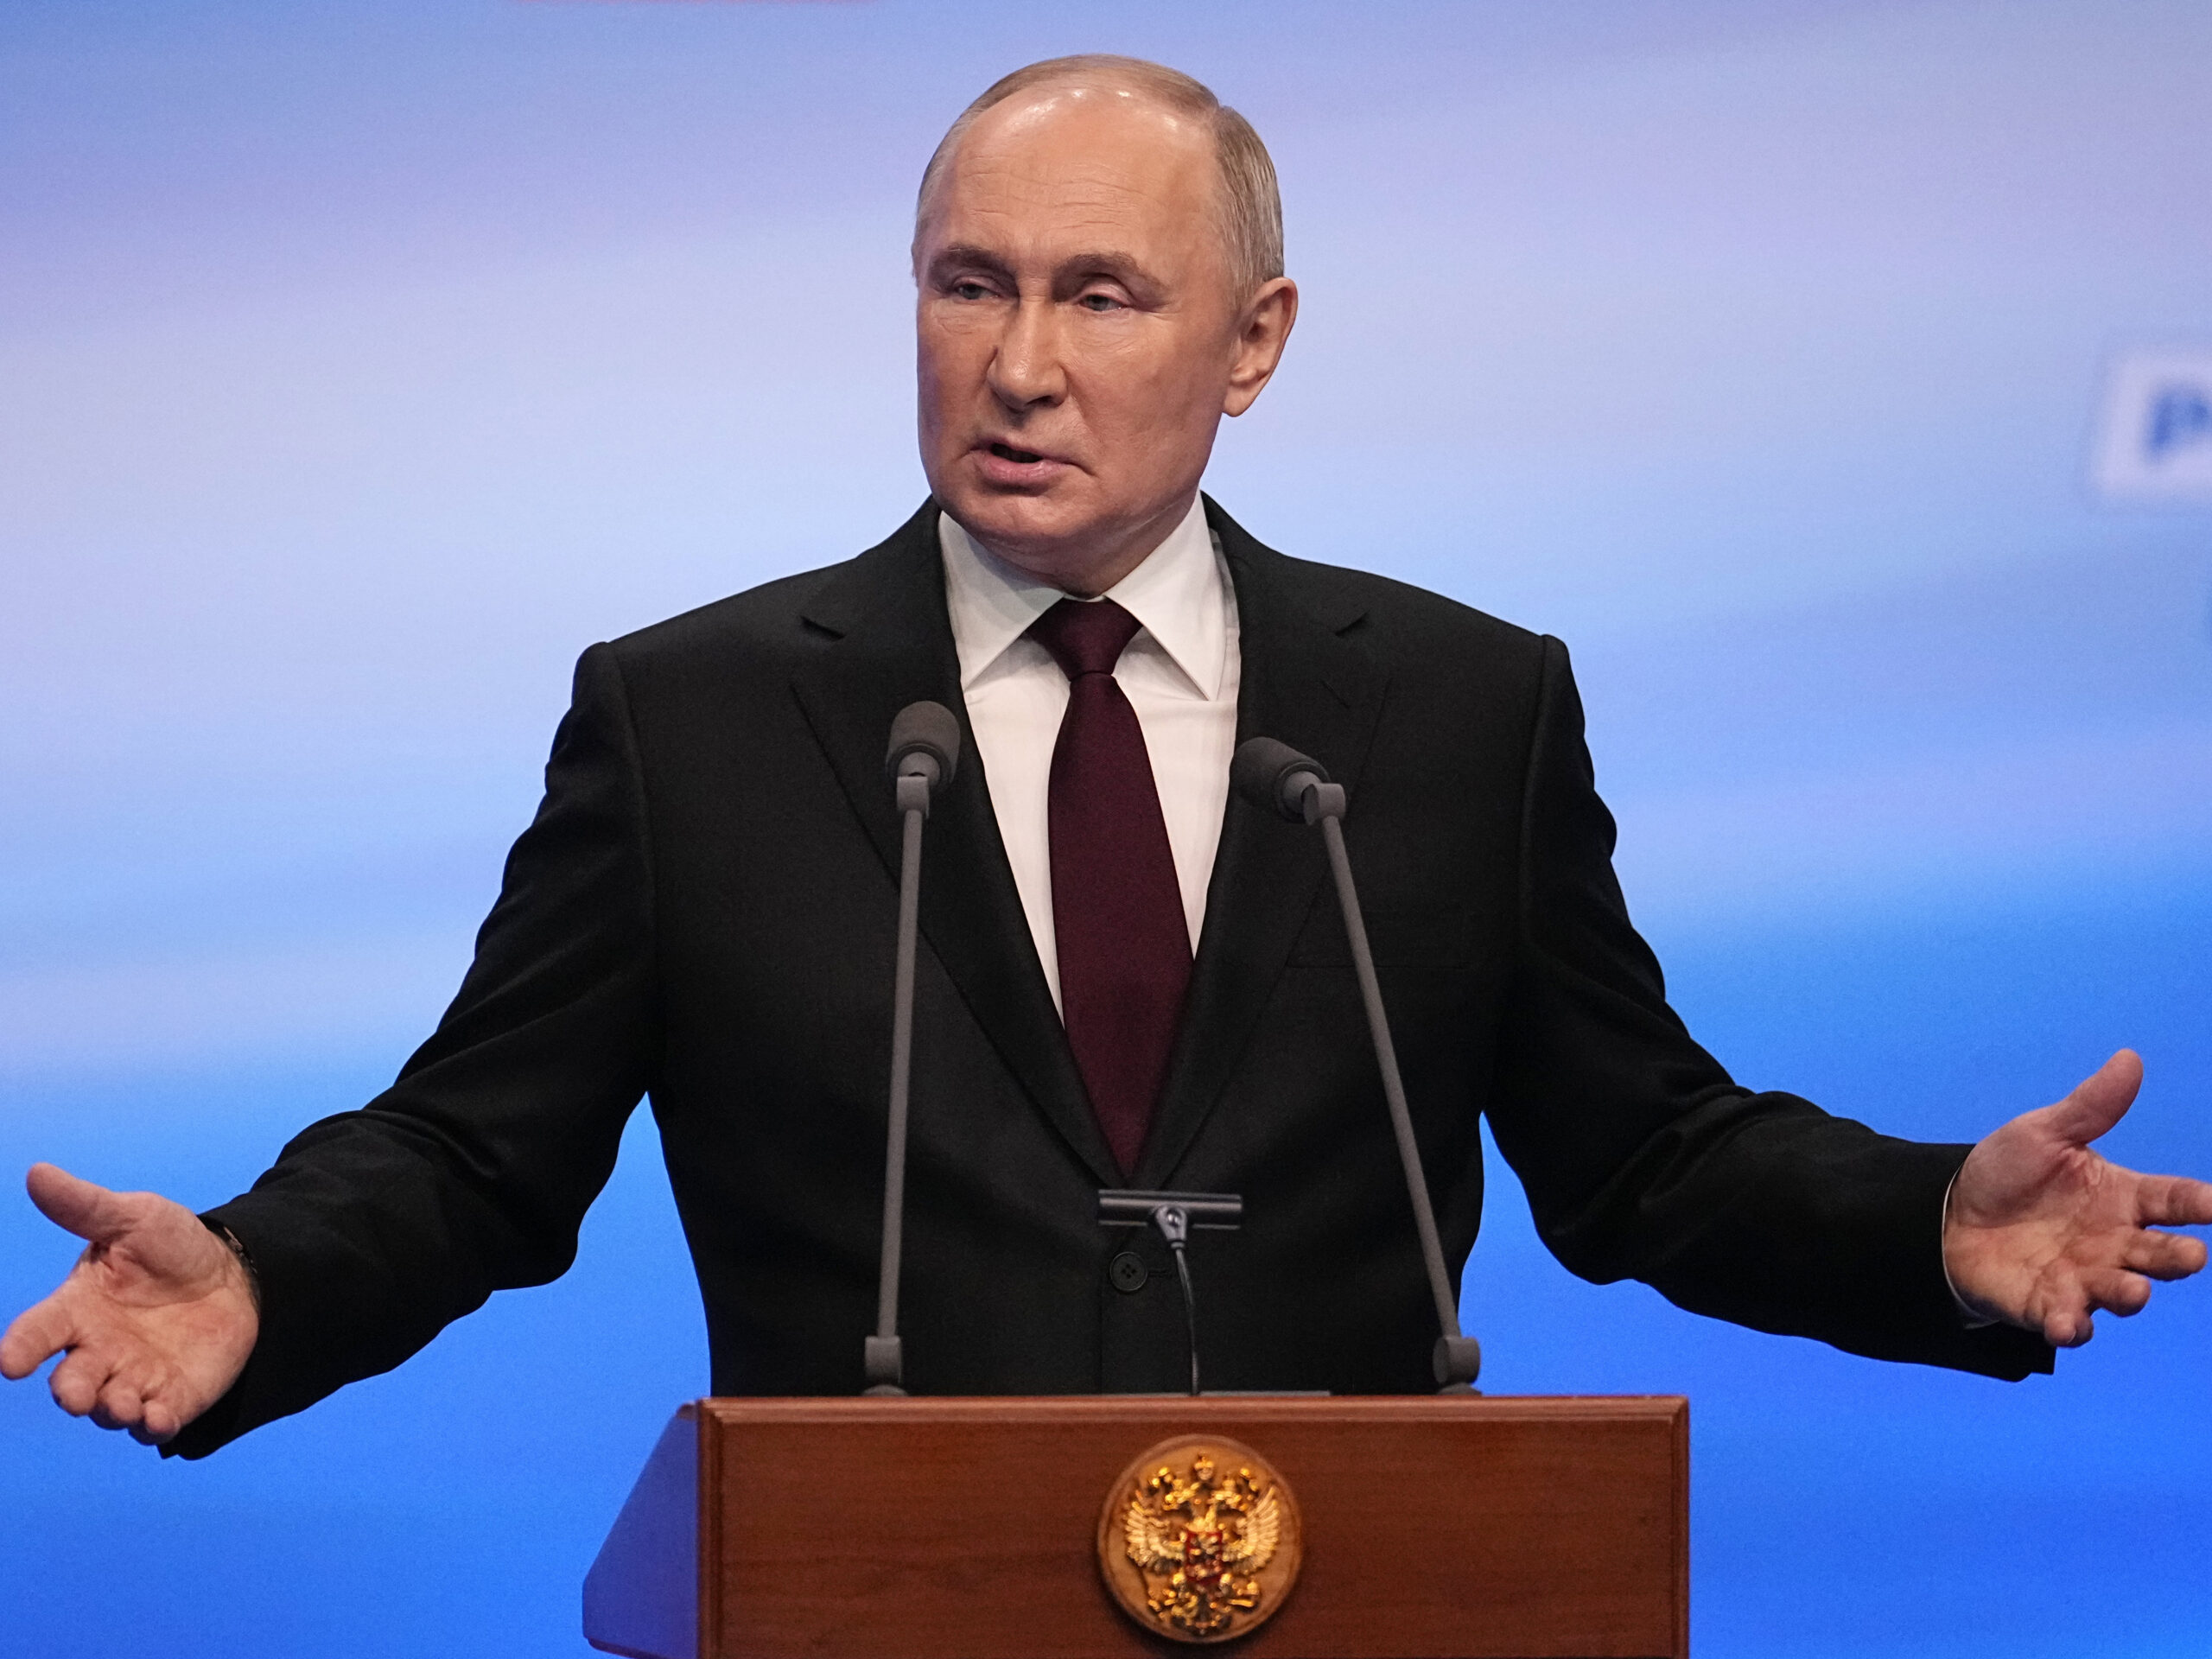 Putin basks in election win that was never in doubt even as Russians quietly protest